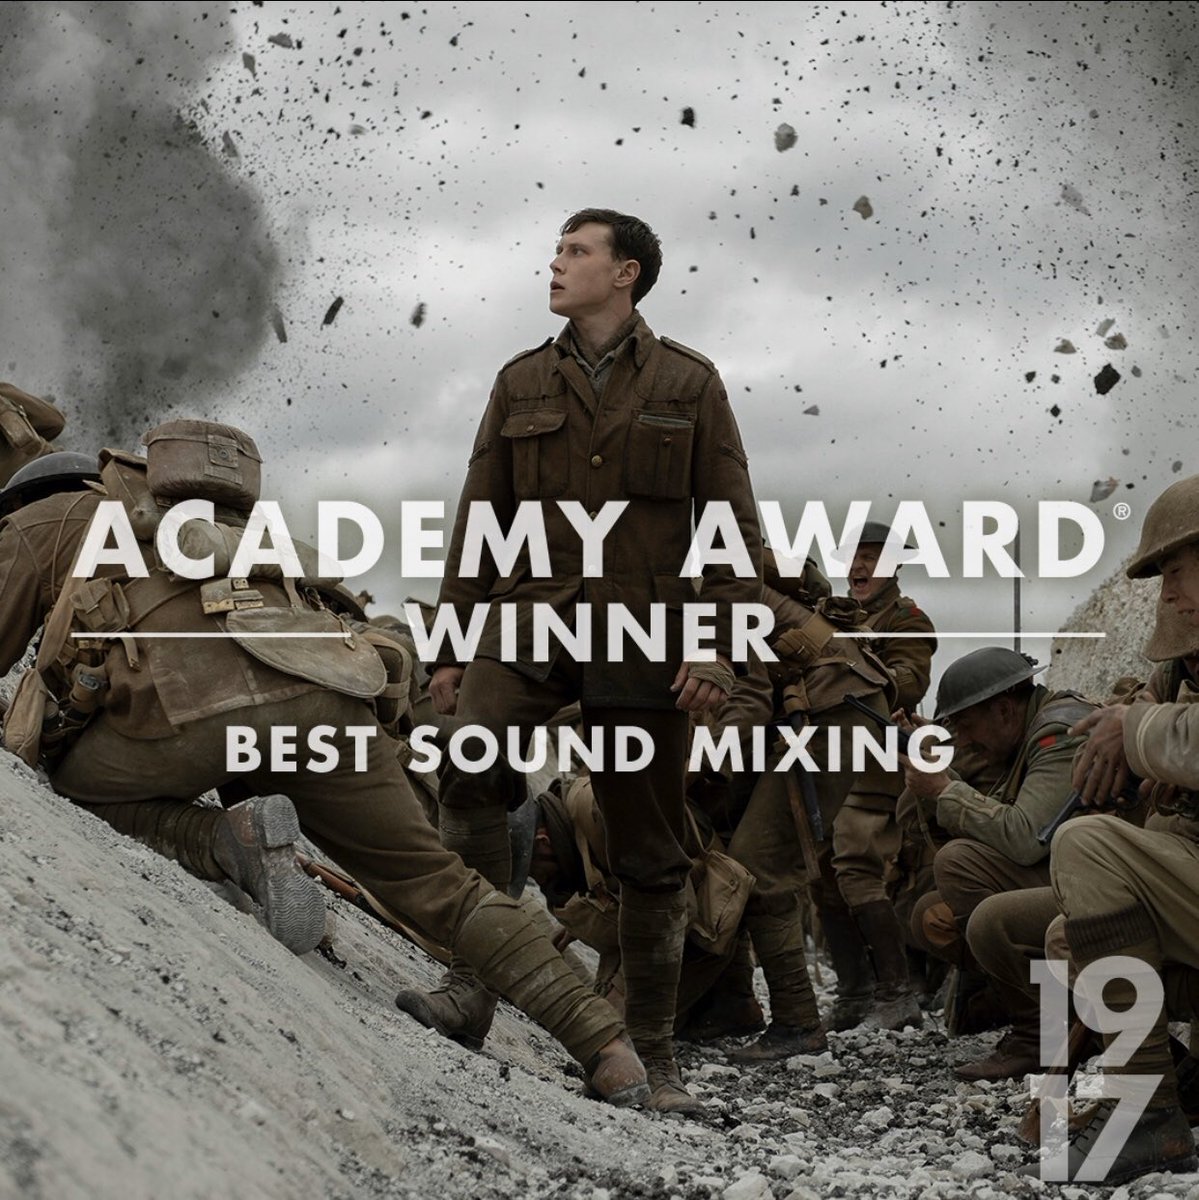 #1917Film is the winner of 3 #Oscars including Best Cinematography - @deakinsarchives, Best Visual Effects and Best Sound Mixing. In cinemas everywhere now.